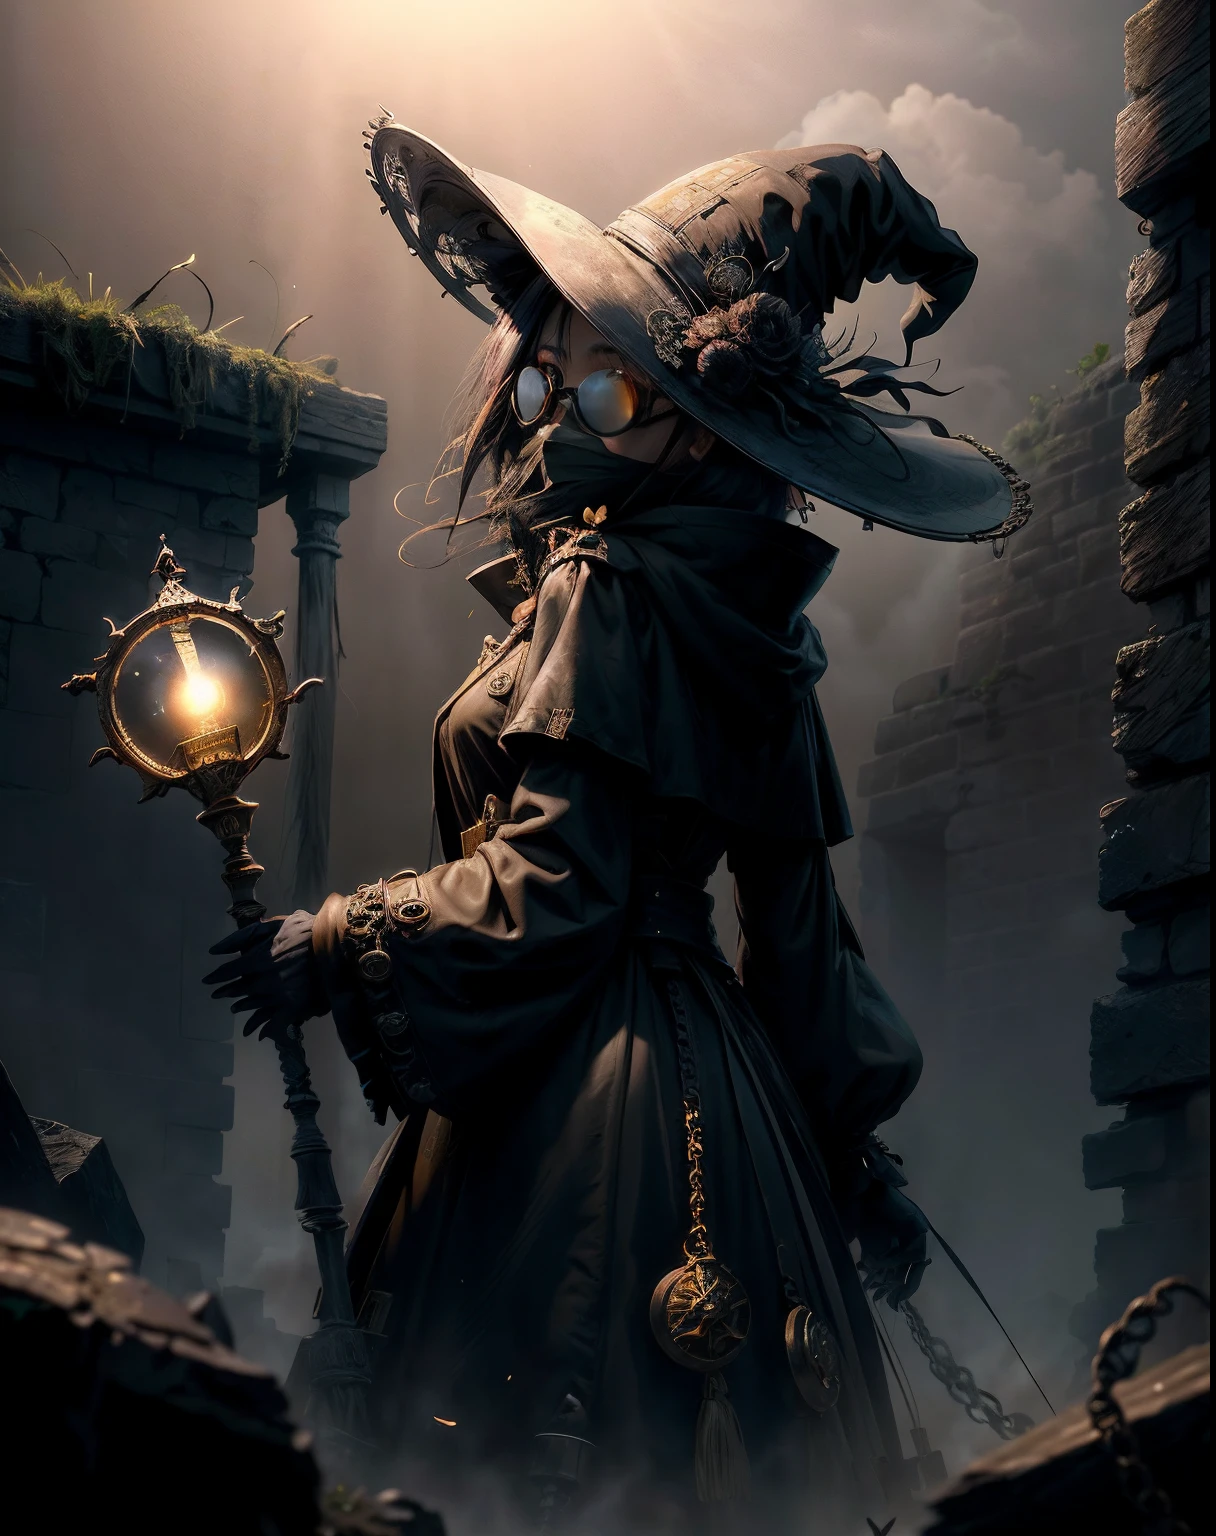 (masutepiece, Best Quality), High resolution, (8K resolution), Center, (ultra-detailliert), Mad God, Solo, Plague mask,Round lens goggles,silk hat, chain, Black veil, trench coat, beaked mask, volume illumination:1.1, darkness, (detail: 1.2), cana, Floating particles, (depth of fields), High quality, Fujifilm 85mm, Ruins, landscape, highly detailed back ground, Nightmare, 8K, Convoluted, Grip, Mysterious,Black fog, Long nails,